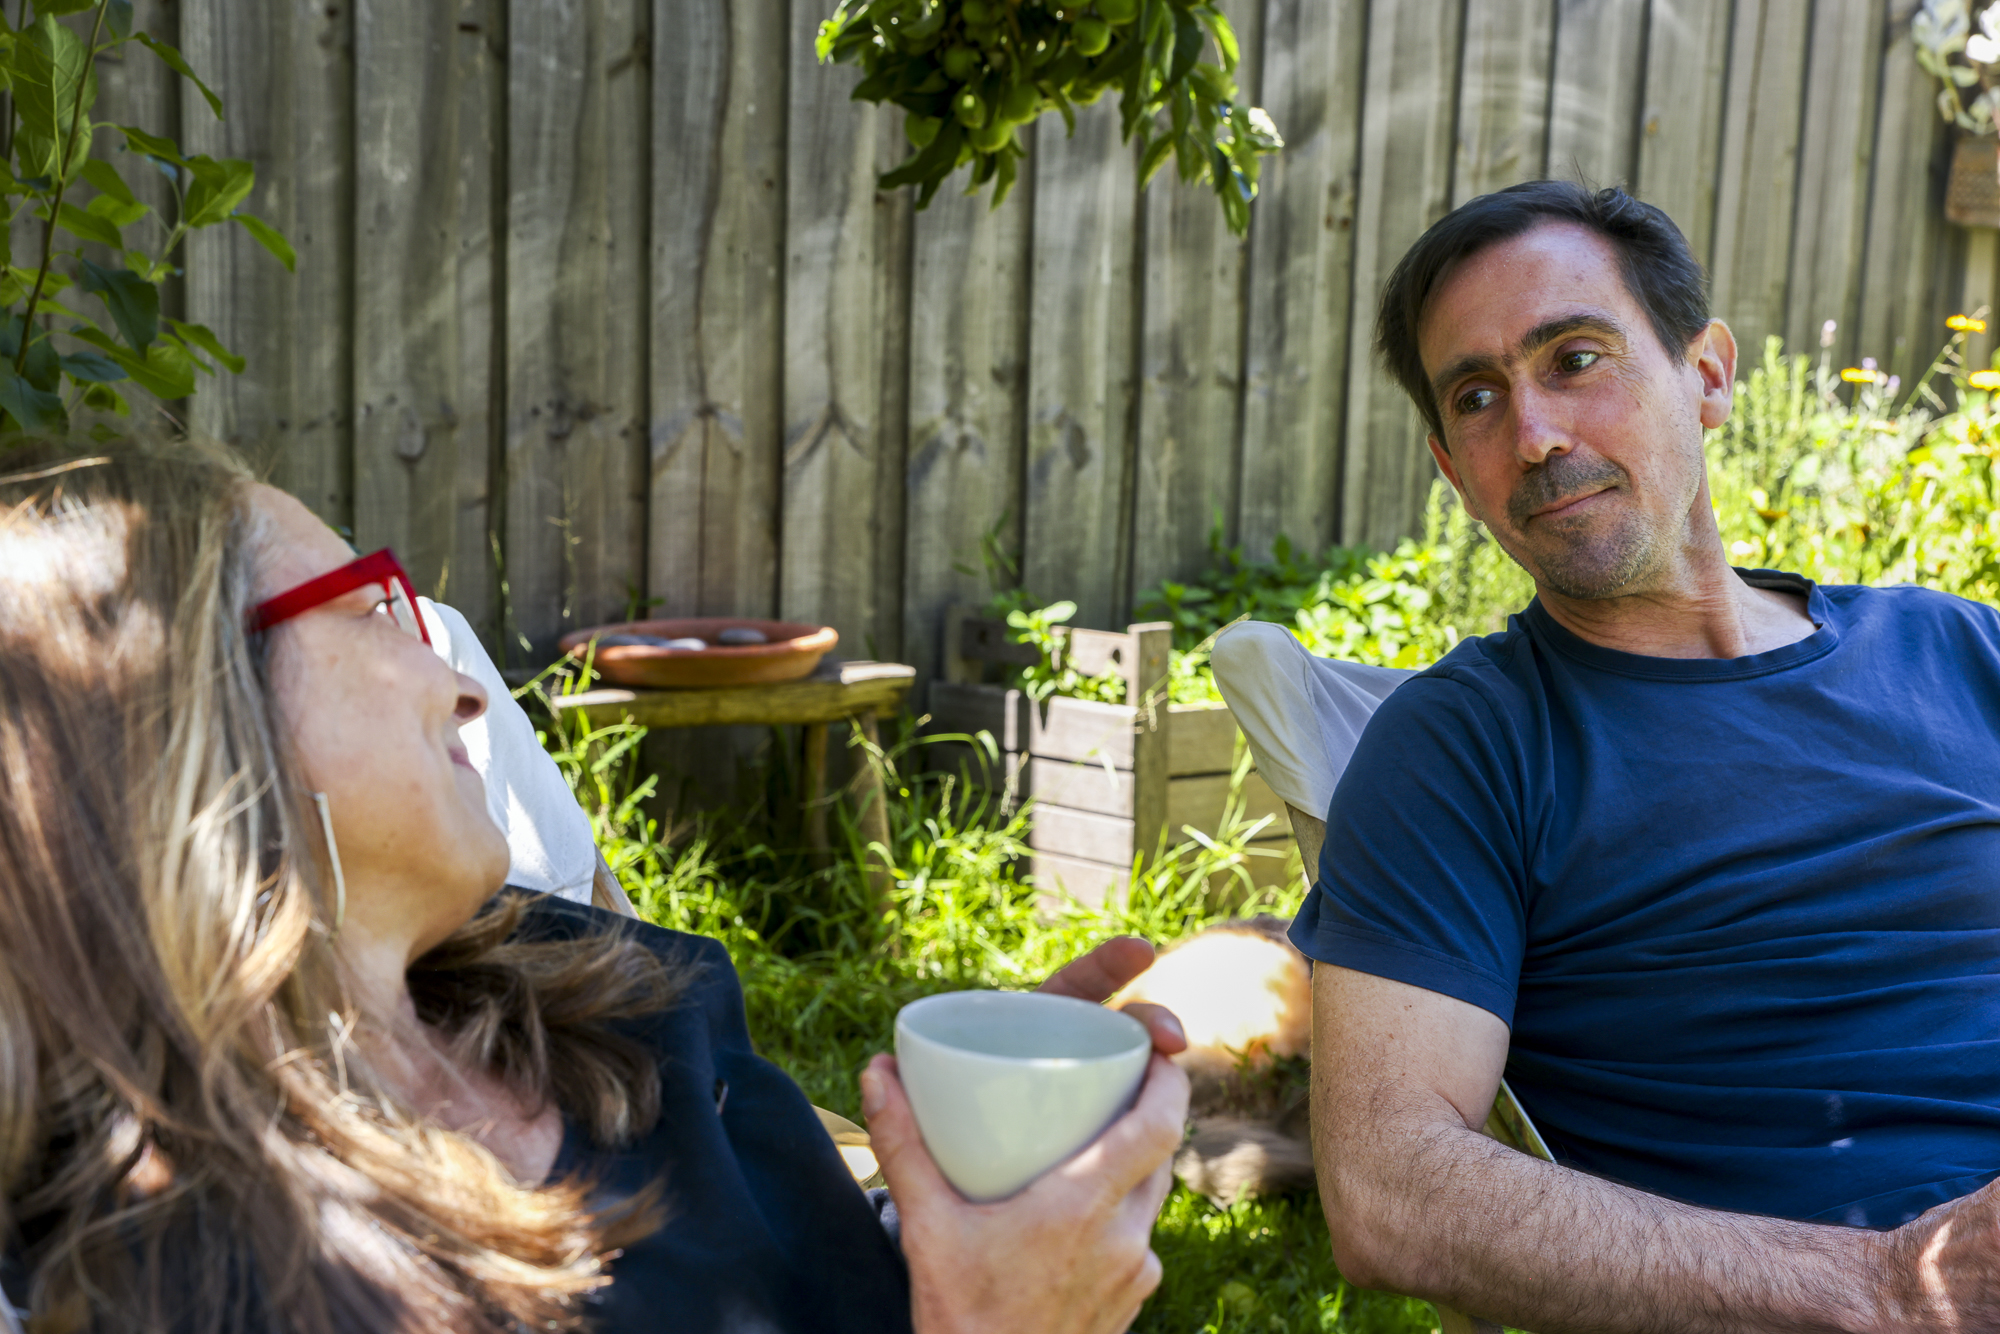 A man and a woman sit outside. They are leaning back in their chairs looking at each other lovingly. She holds a cup,